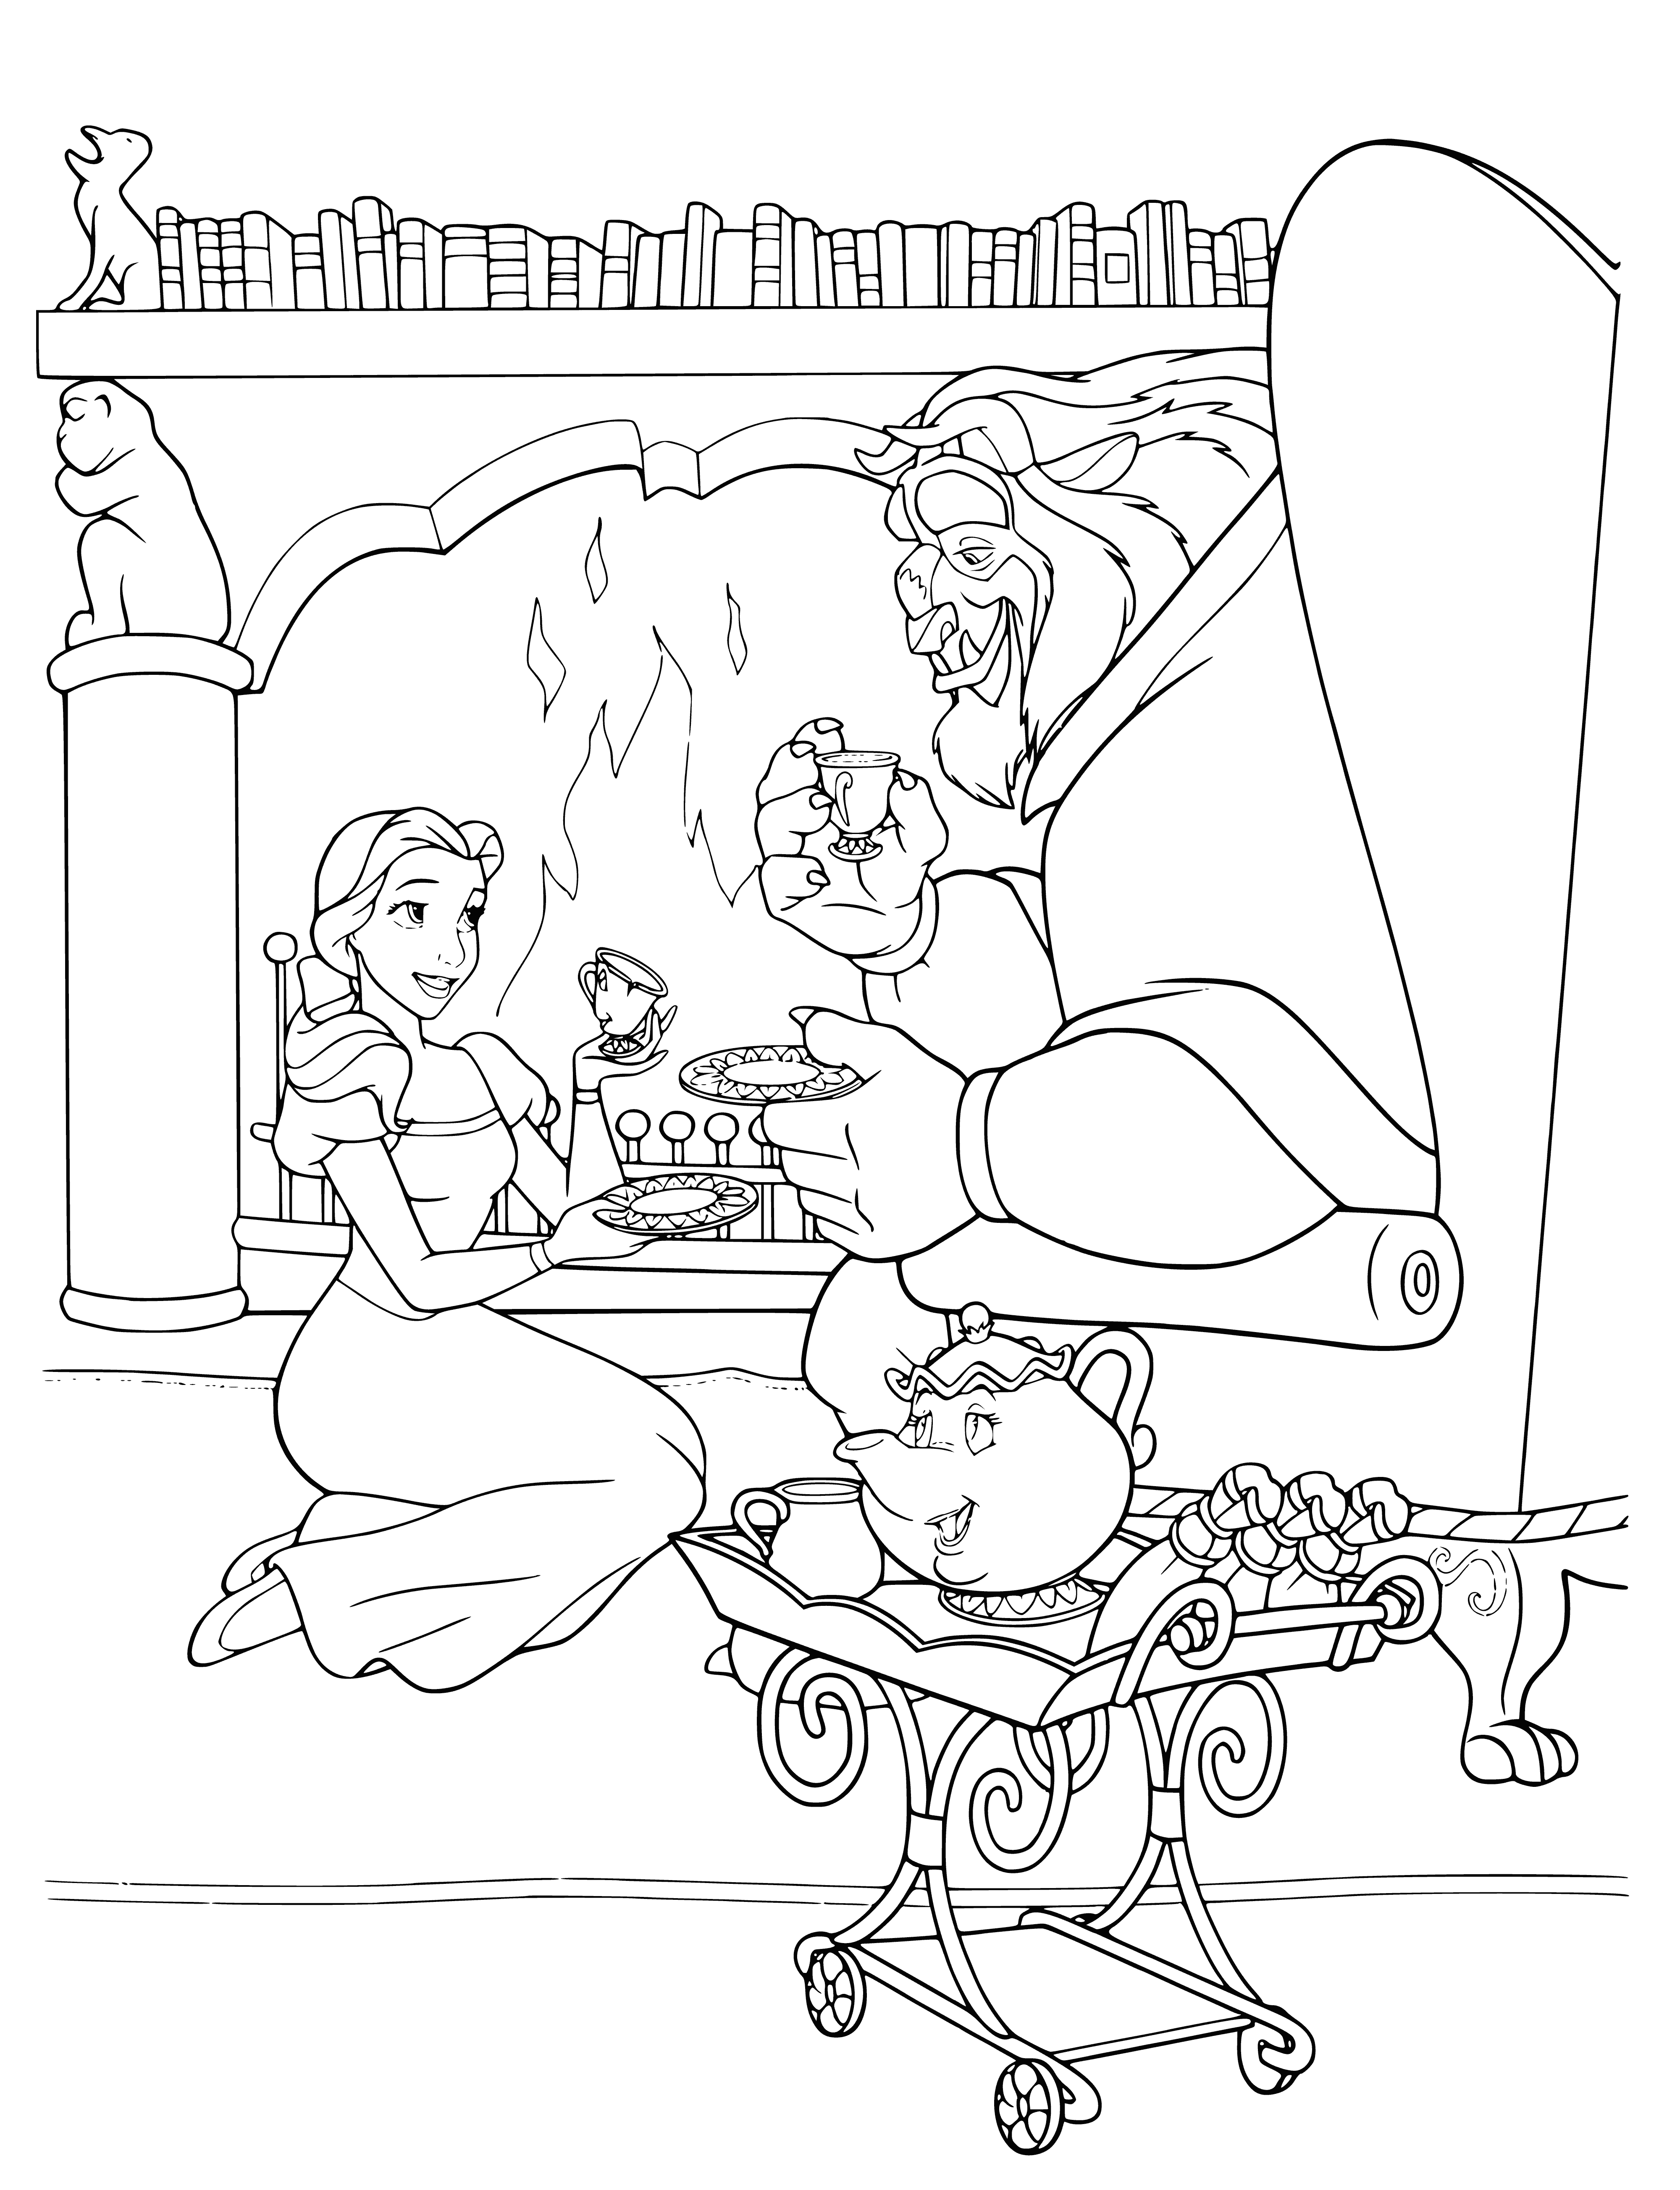 coloring page: Belle & Beast embrace before fireplace, looking into each other's eyes.